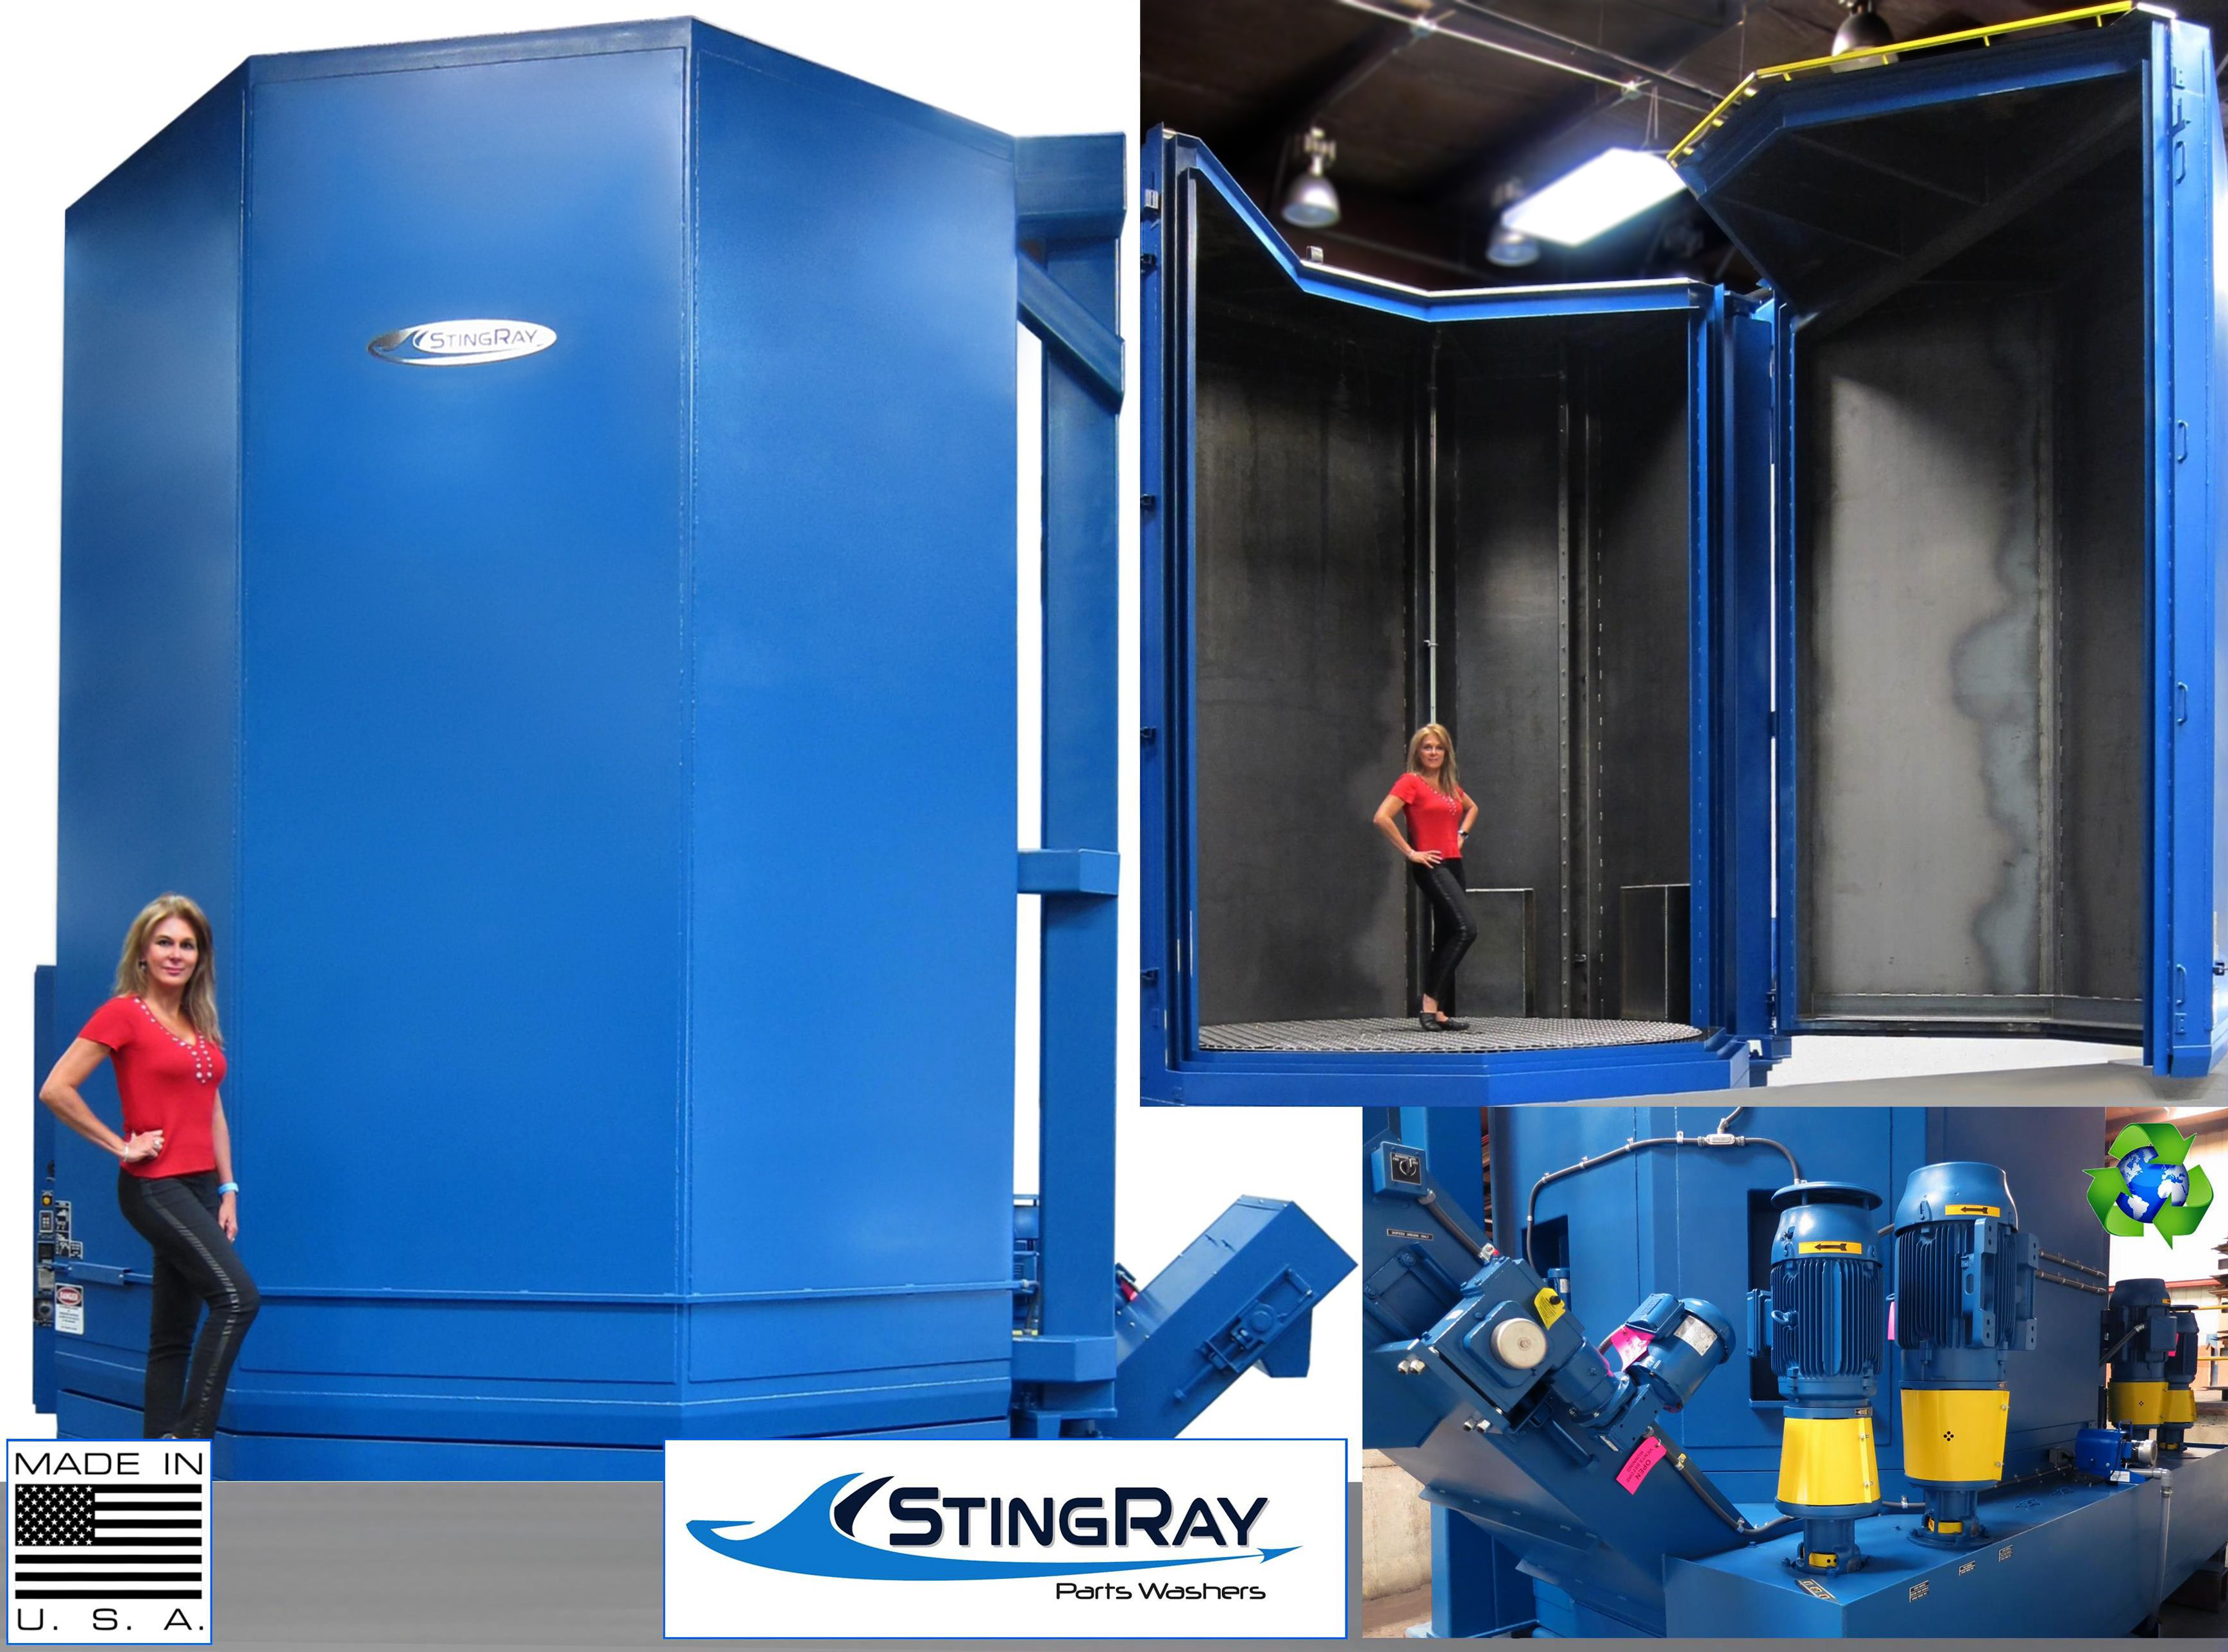 Large Industrial Parts Washer by StingRay for Power Generation Turbine Components